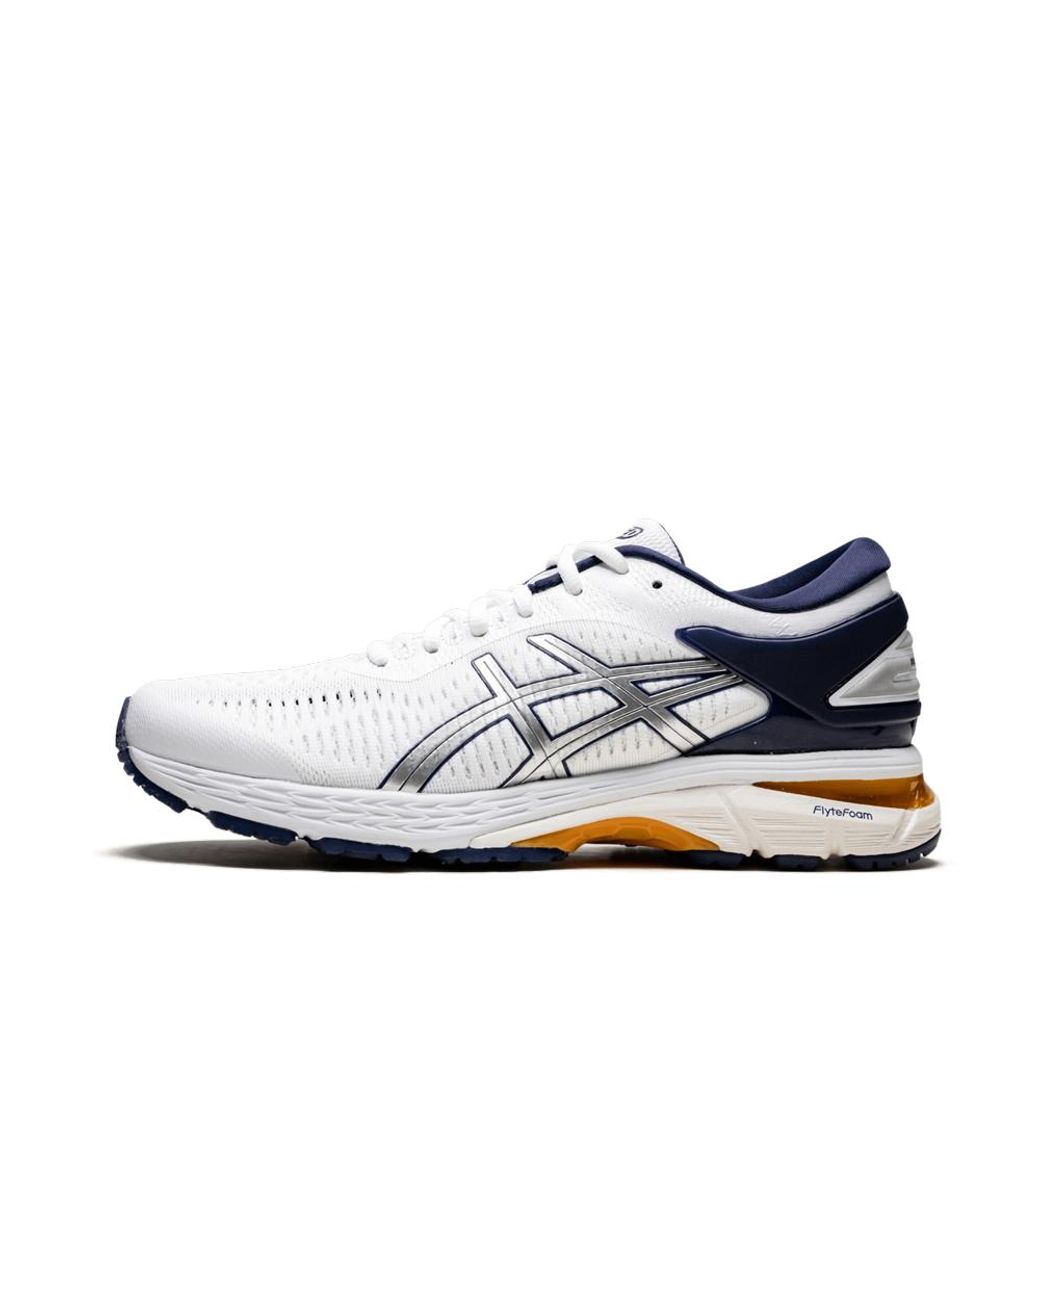 Asics Gel-kayano 25 'naked' Shoes - Size 7 in White for Men - Lyst